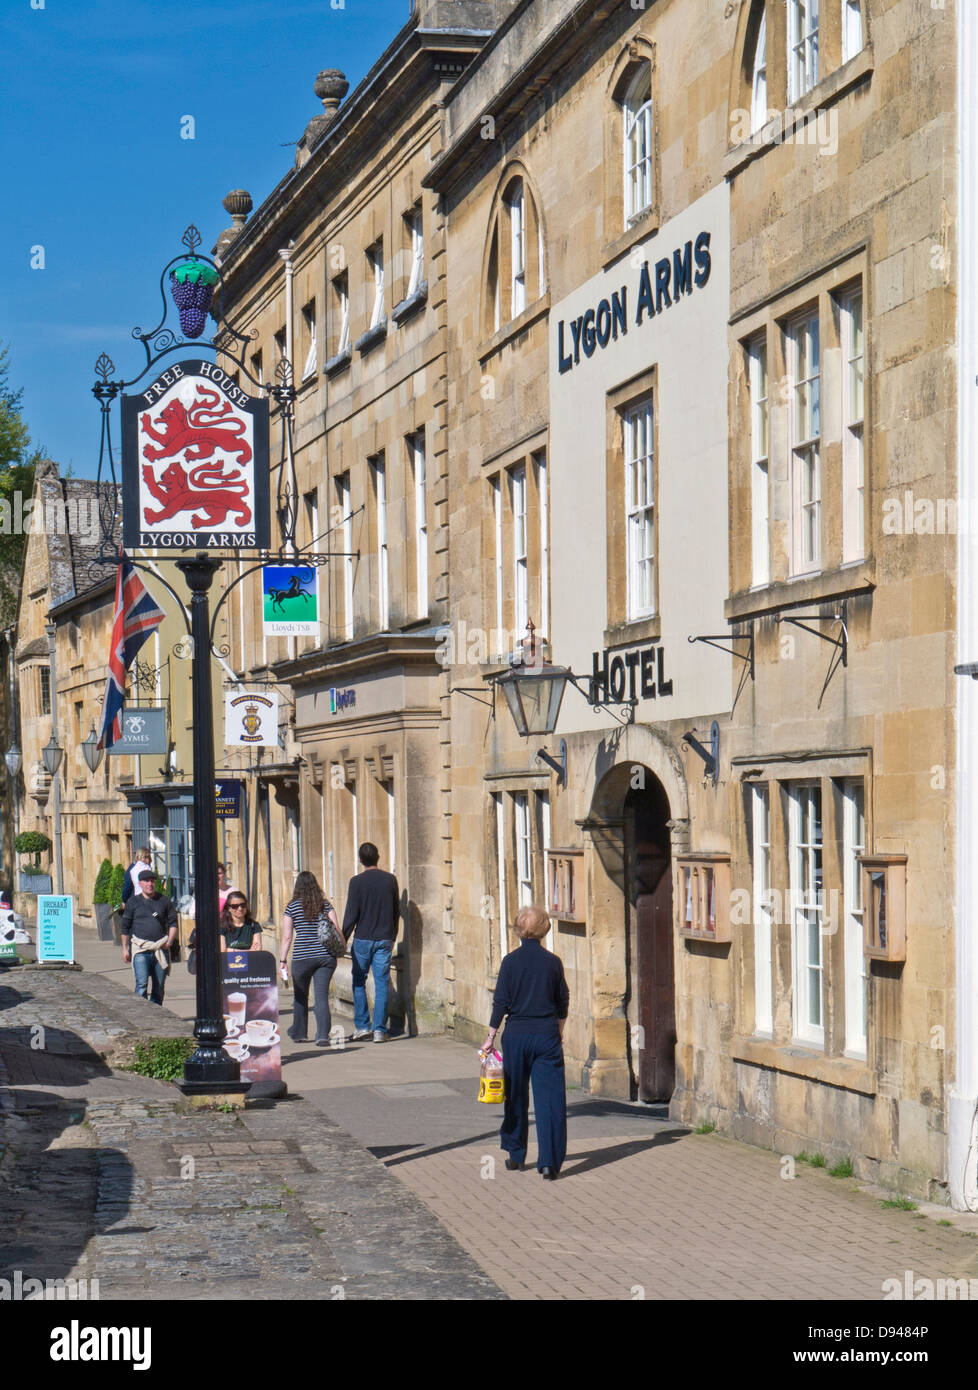 LYGON ARMS Chipping Campden High Street including Lygon Arms Hotel Cotswolds UK Stock Photo